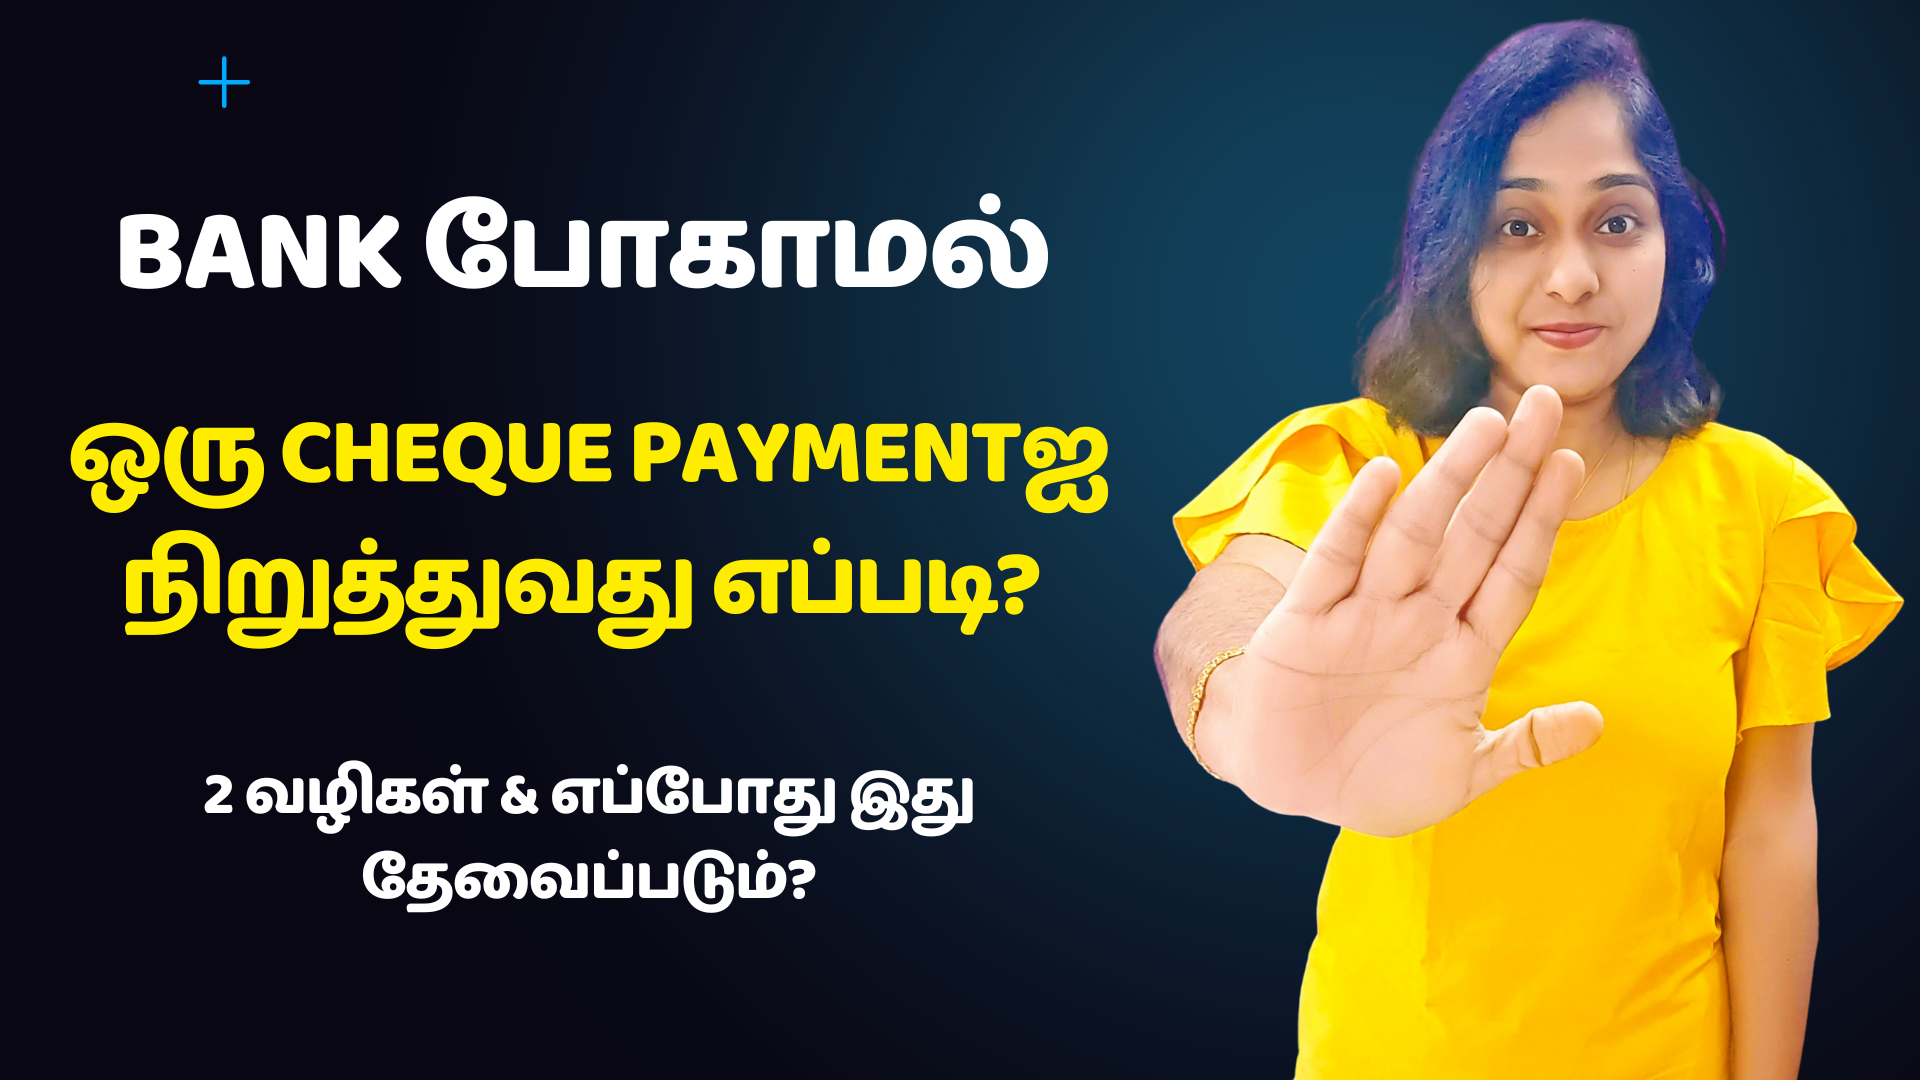 How To Stop A Cheque Payment Without Visiting Bank - NetBanking And Mobile Banking Demo (SBI)